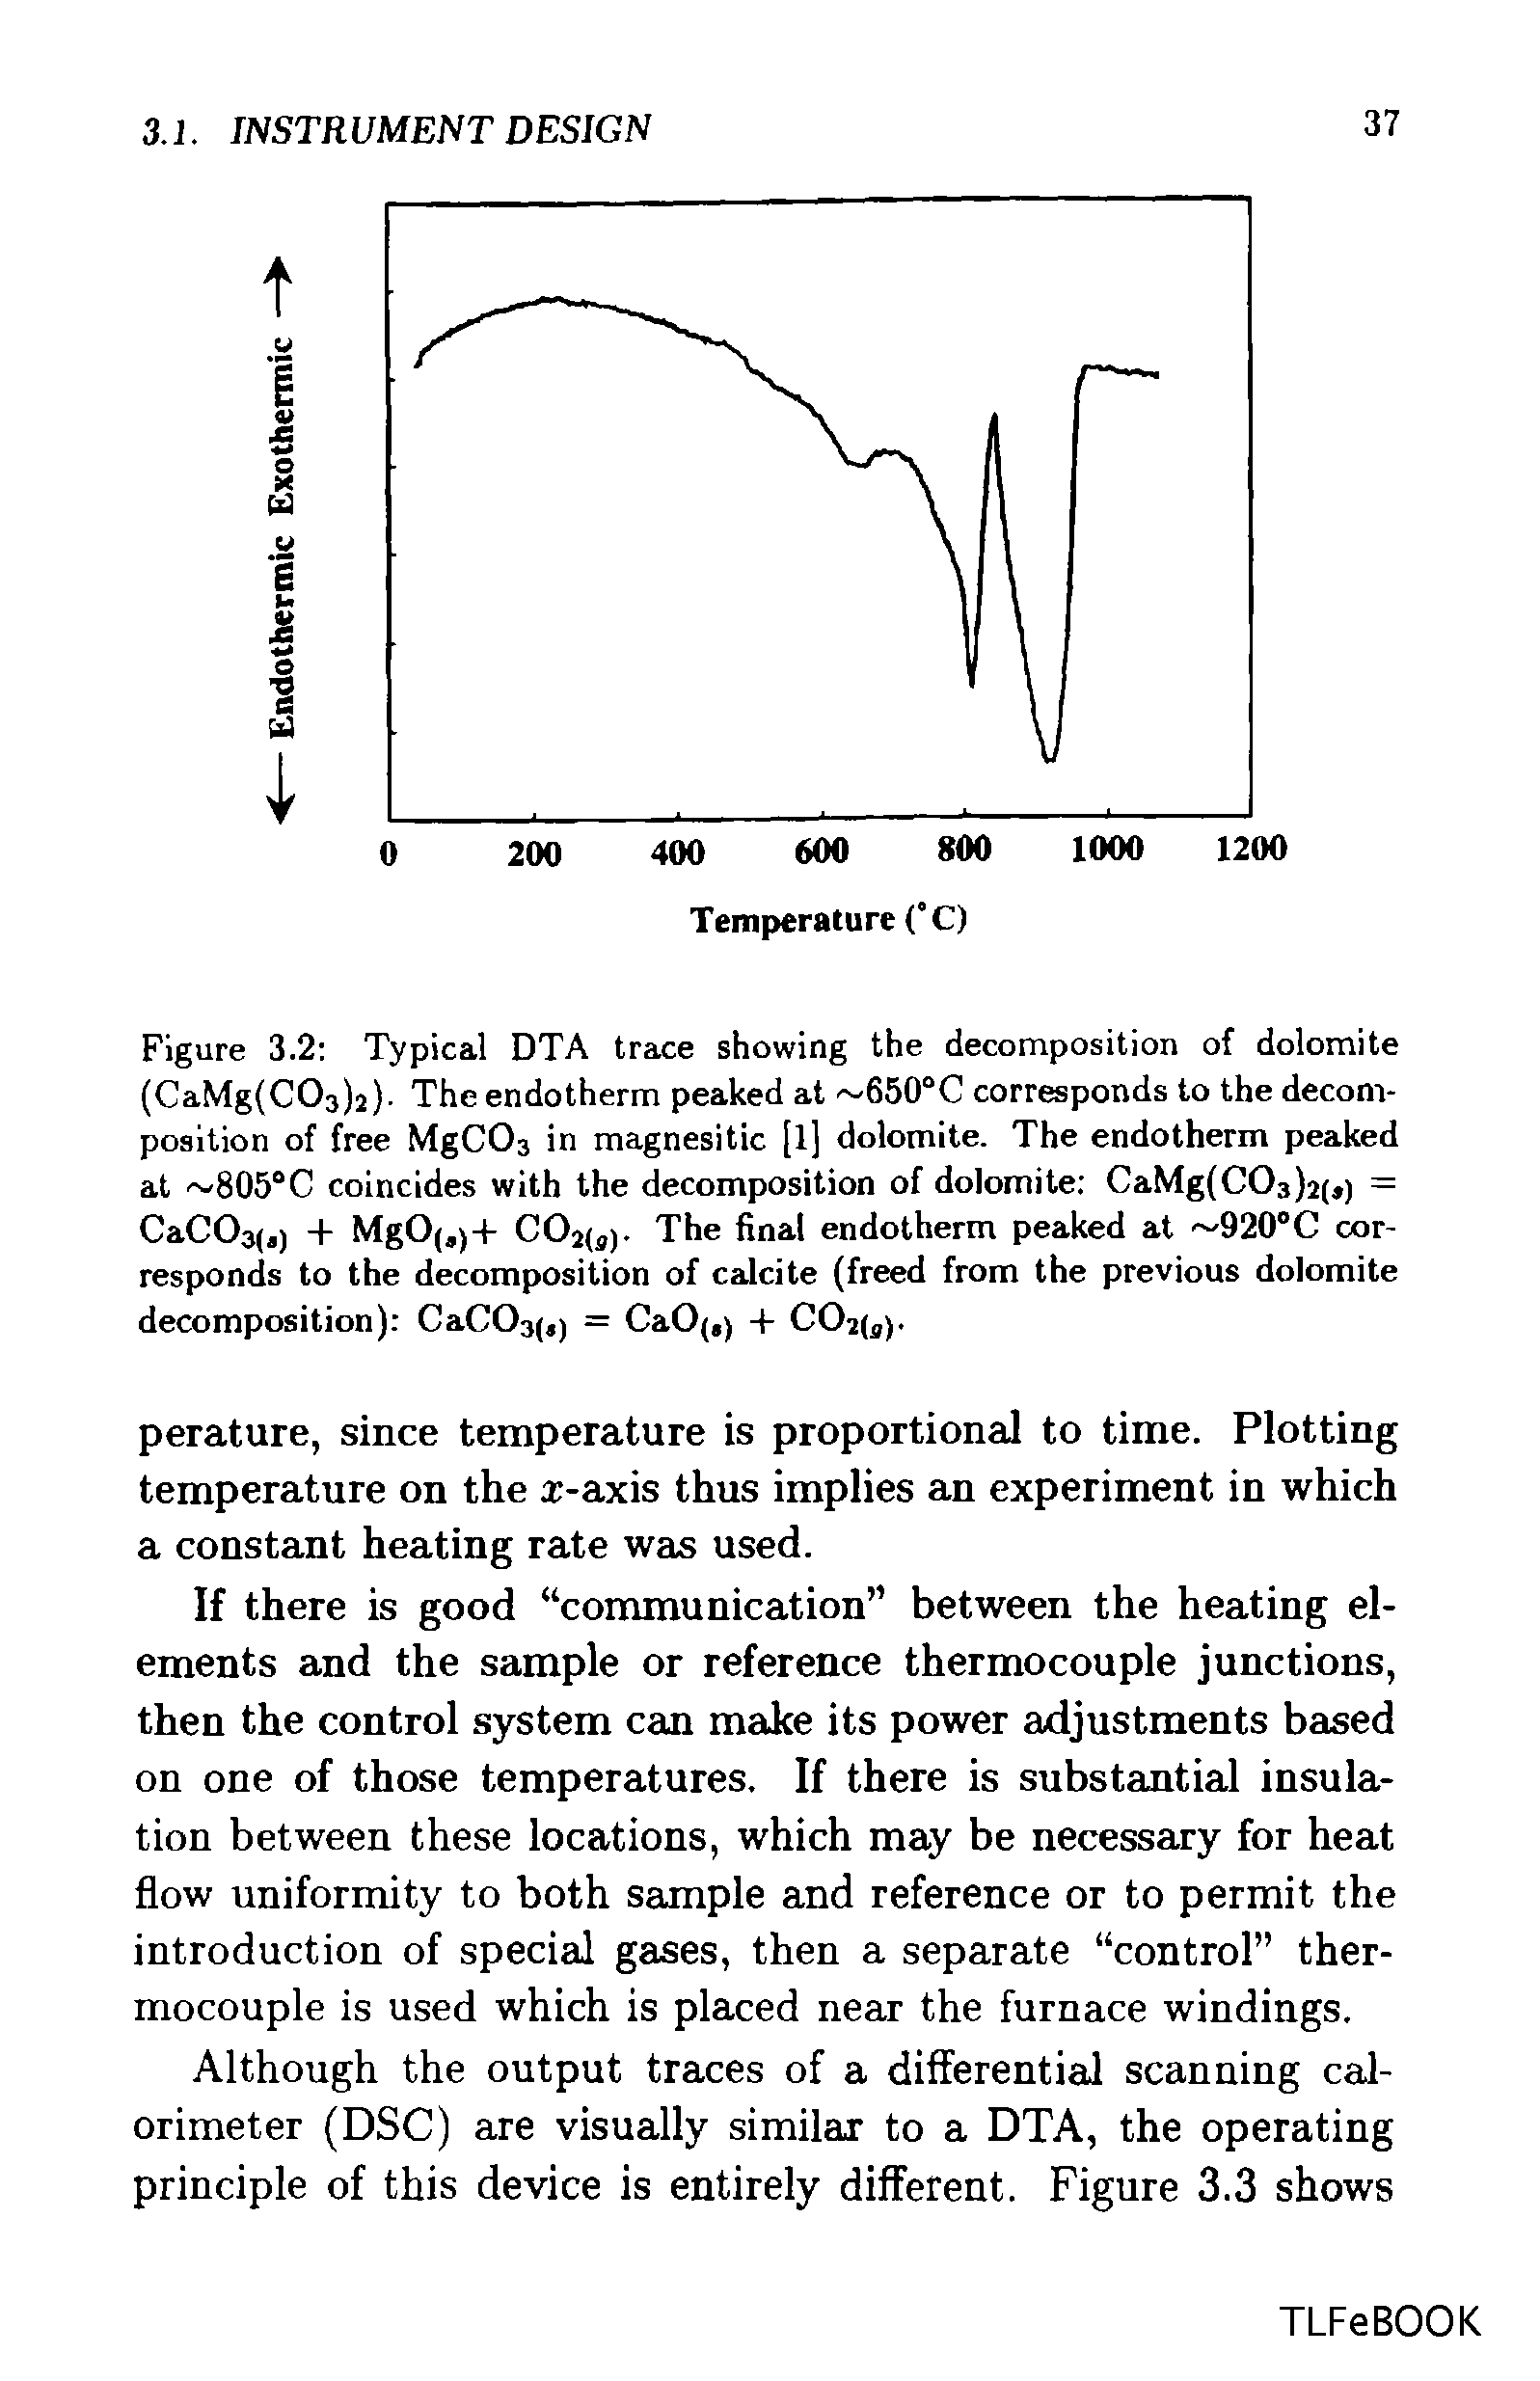 Figure 3.2 Typical DTA trace showing the decomposition of dolomite (CaMg(C03)2). The endotherm peaked at 650°C corresponds to the decomposition of free MgC03 in magnesitic [1] dolomite. The endotherm peaked at 805°C coincides with the decomposition of dolomite CaMg(C03)2(,) = CaC03(,) + MgO( )+ C02(s). The final endotherm peaked at 920°C corresponds to the decomposition of calcite (freed from the previous dolomite decomposition) CaC03(,) = CaO(,j + C02(s).